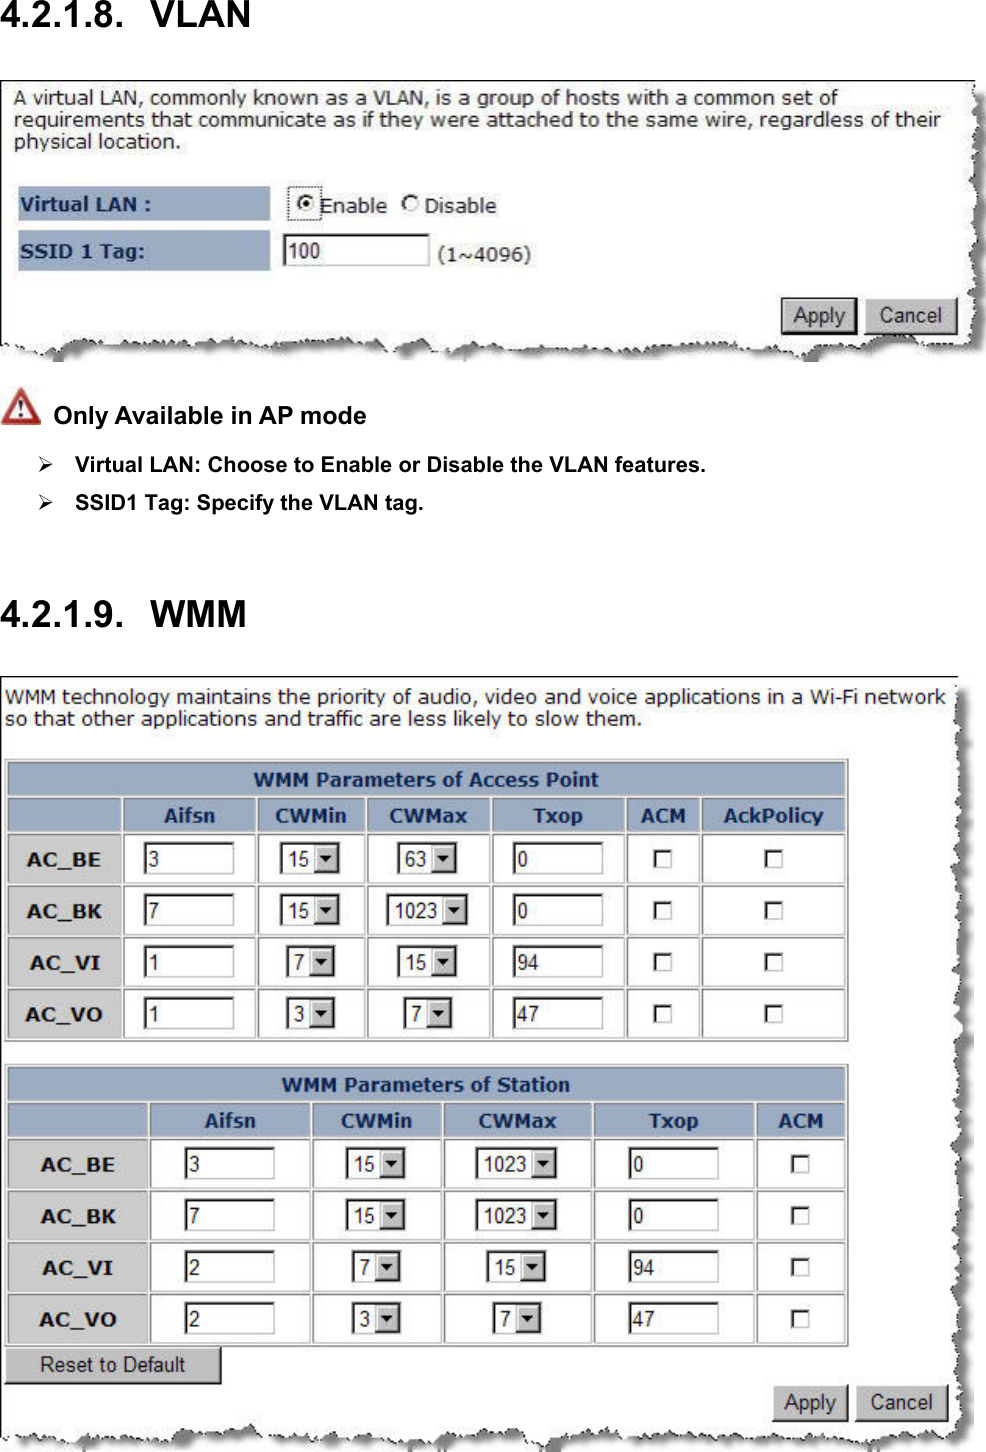 4.2.1.8. VLAN    Only Available in AP mode ¾ Virtual LAN: Choose to Enable or Disable the VLAN features.   ¾ SSID1 Tag: Specify the VLAN tag.    4.2.1.9. WMM  